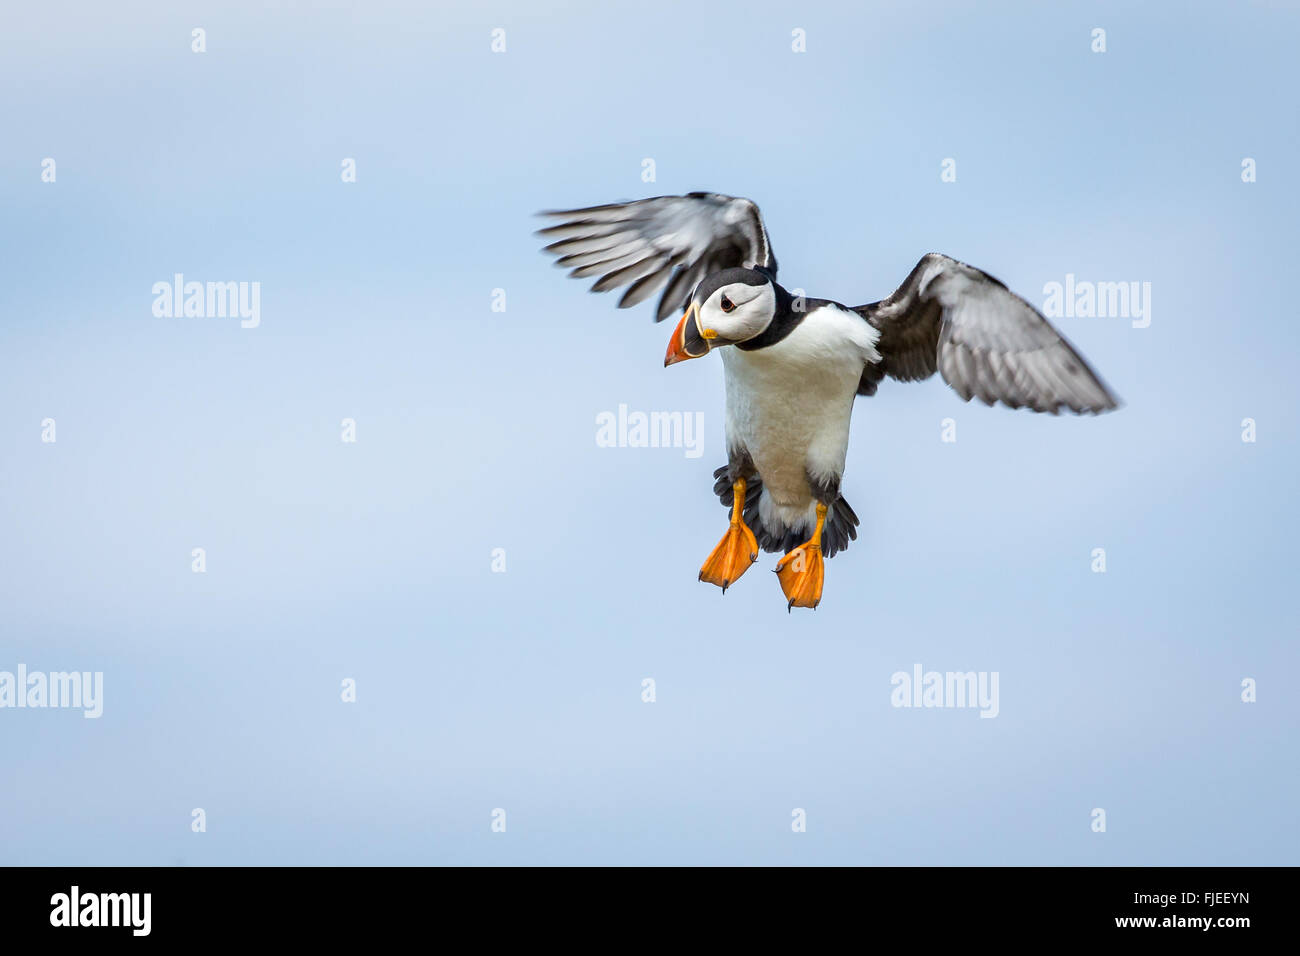 Puffin (Fratercula arctica) coming in to land with wings outstretched Stock Photo